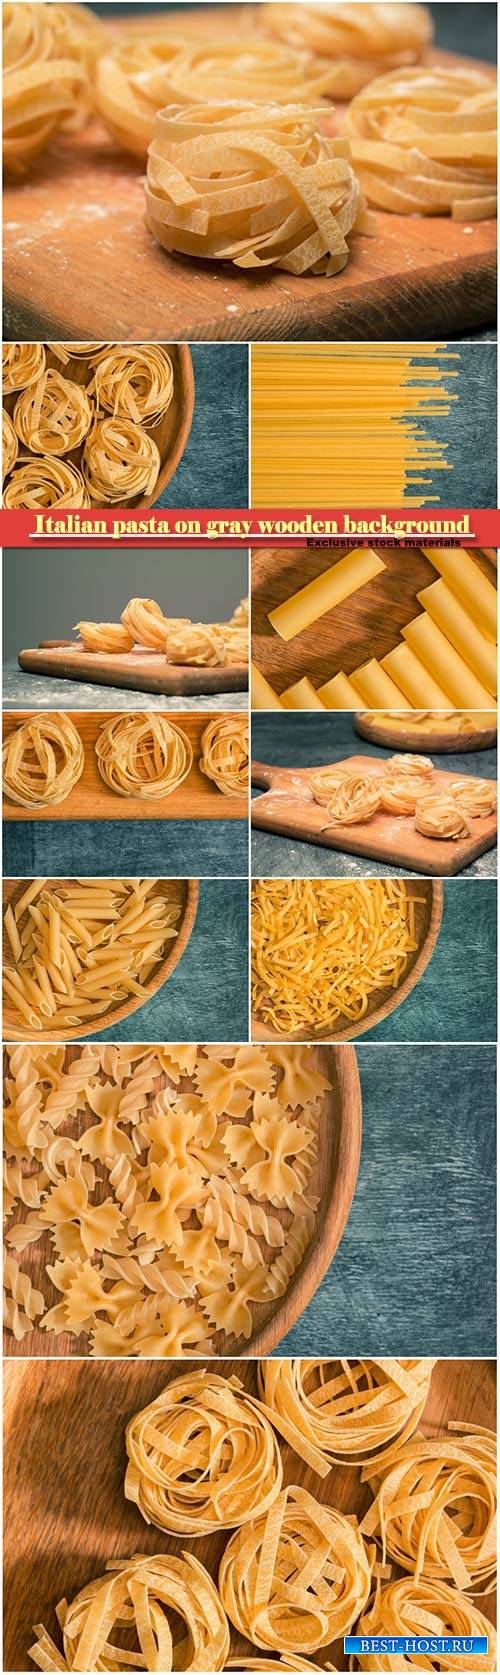 The dry Italian pasta on gray wooden background